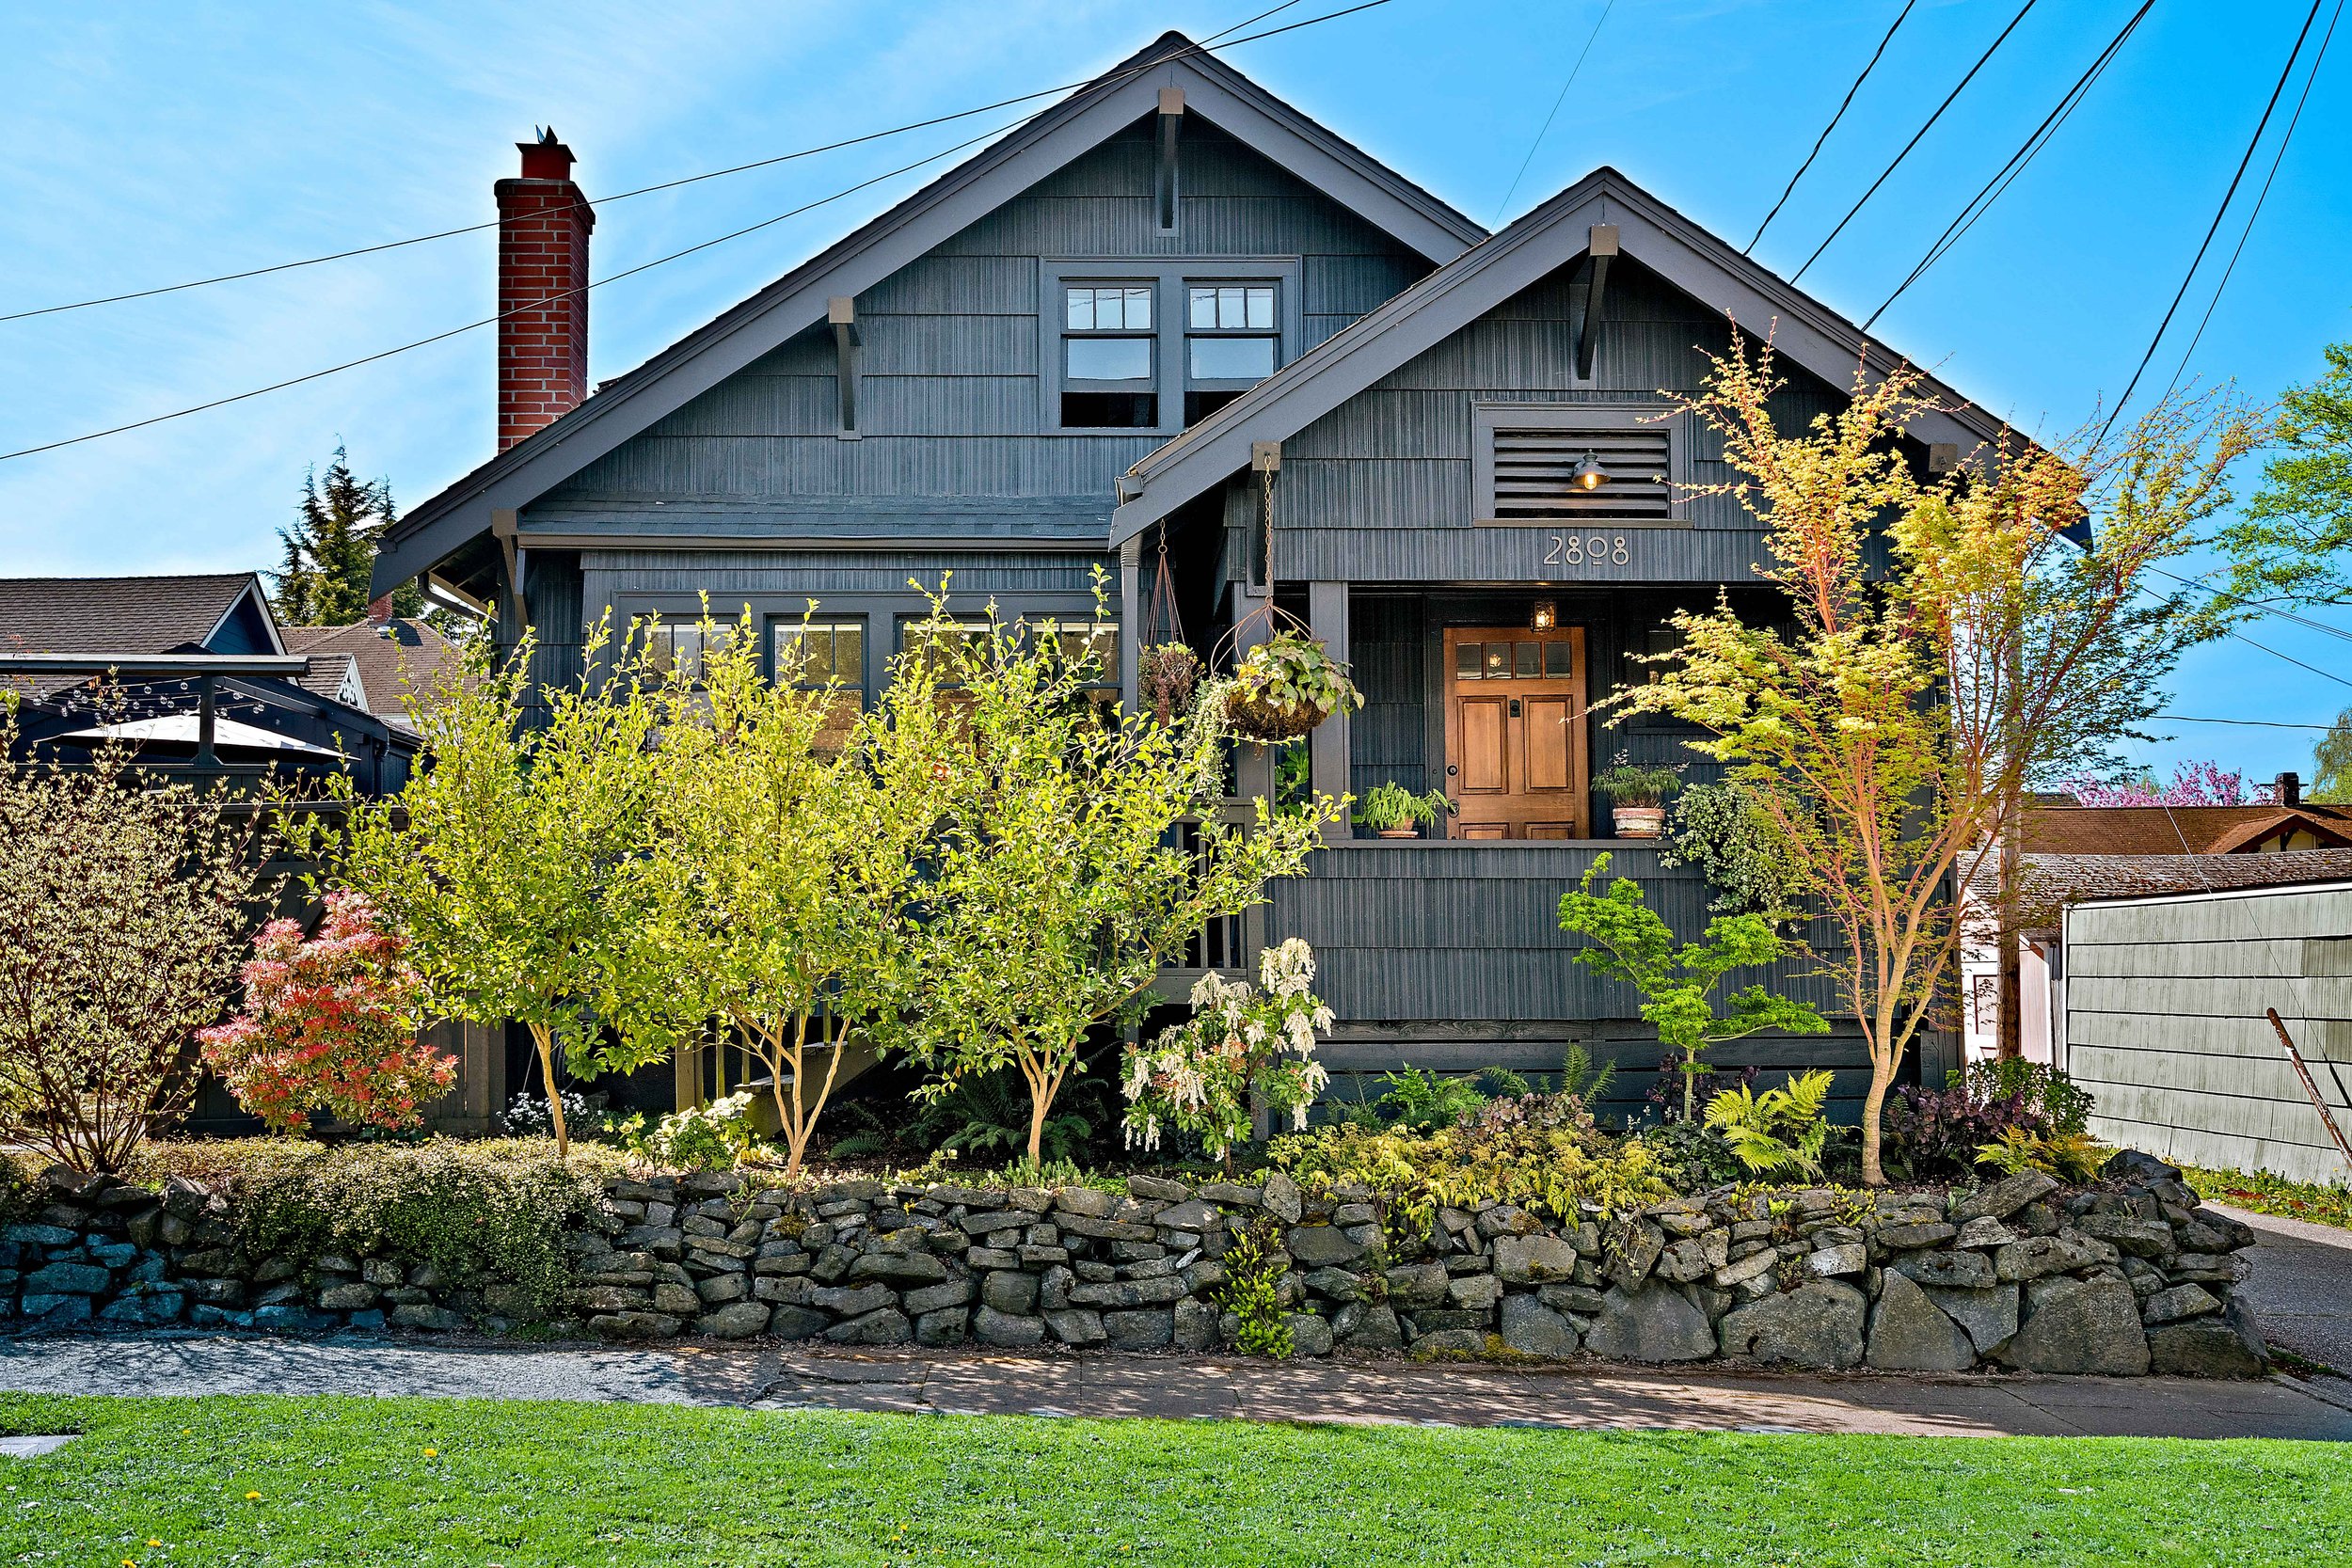 6th Ave District Craftsman